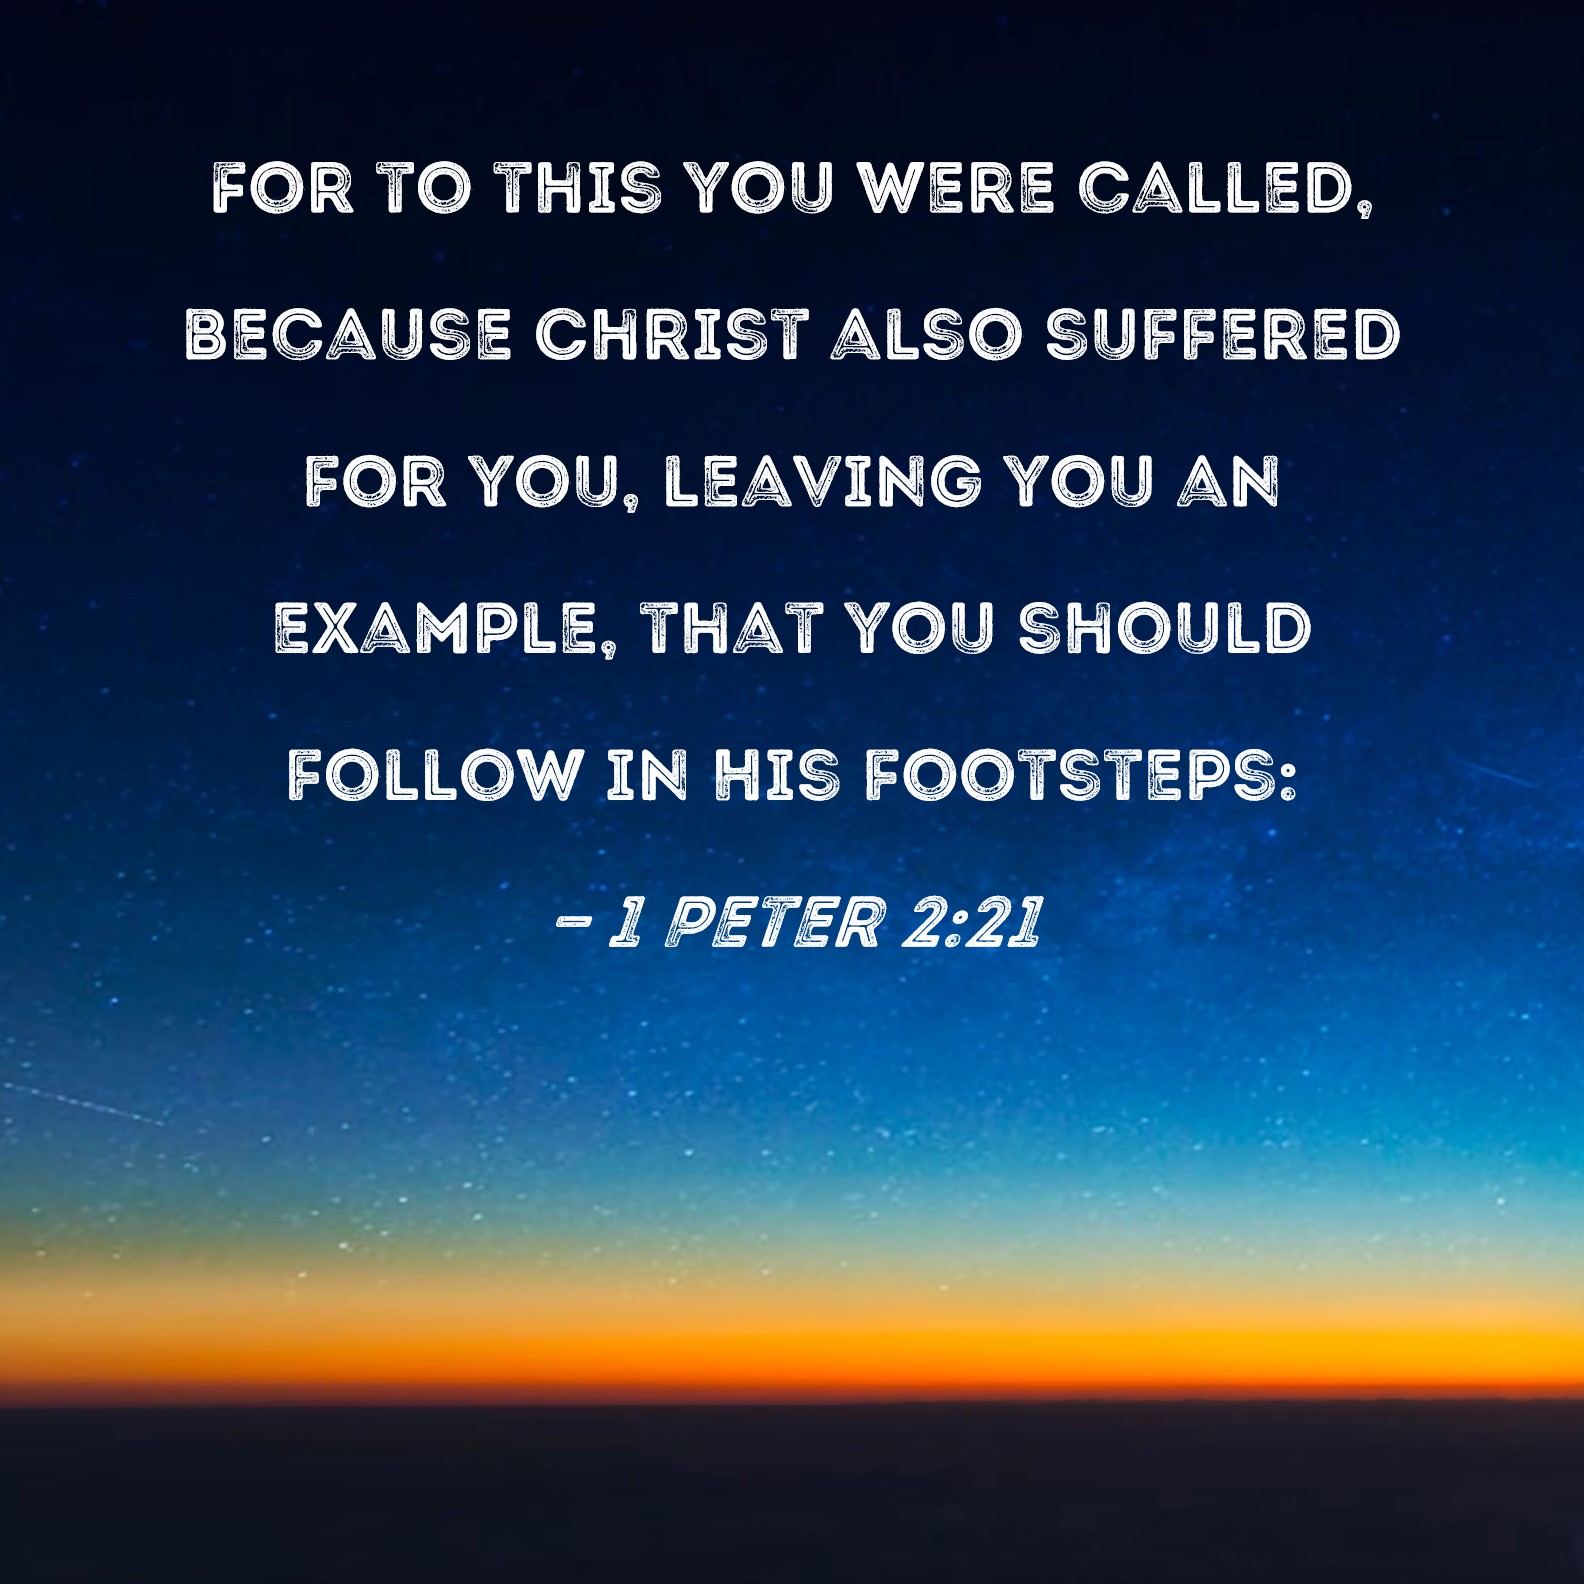 1 Peter 2:21 For to this you were called, because Christ also suffered